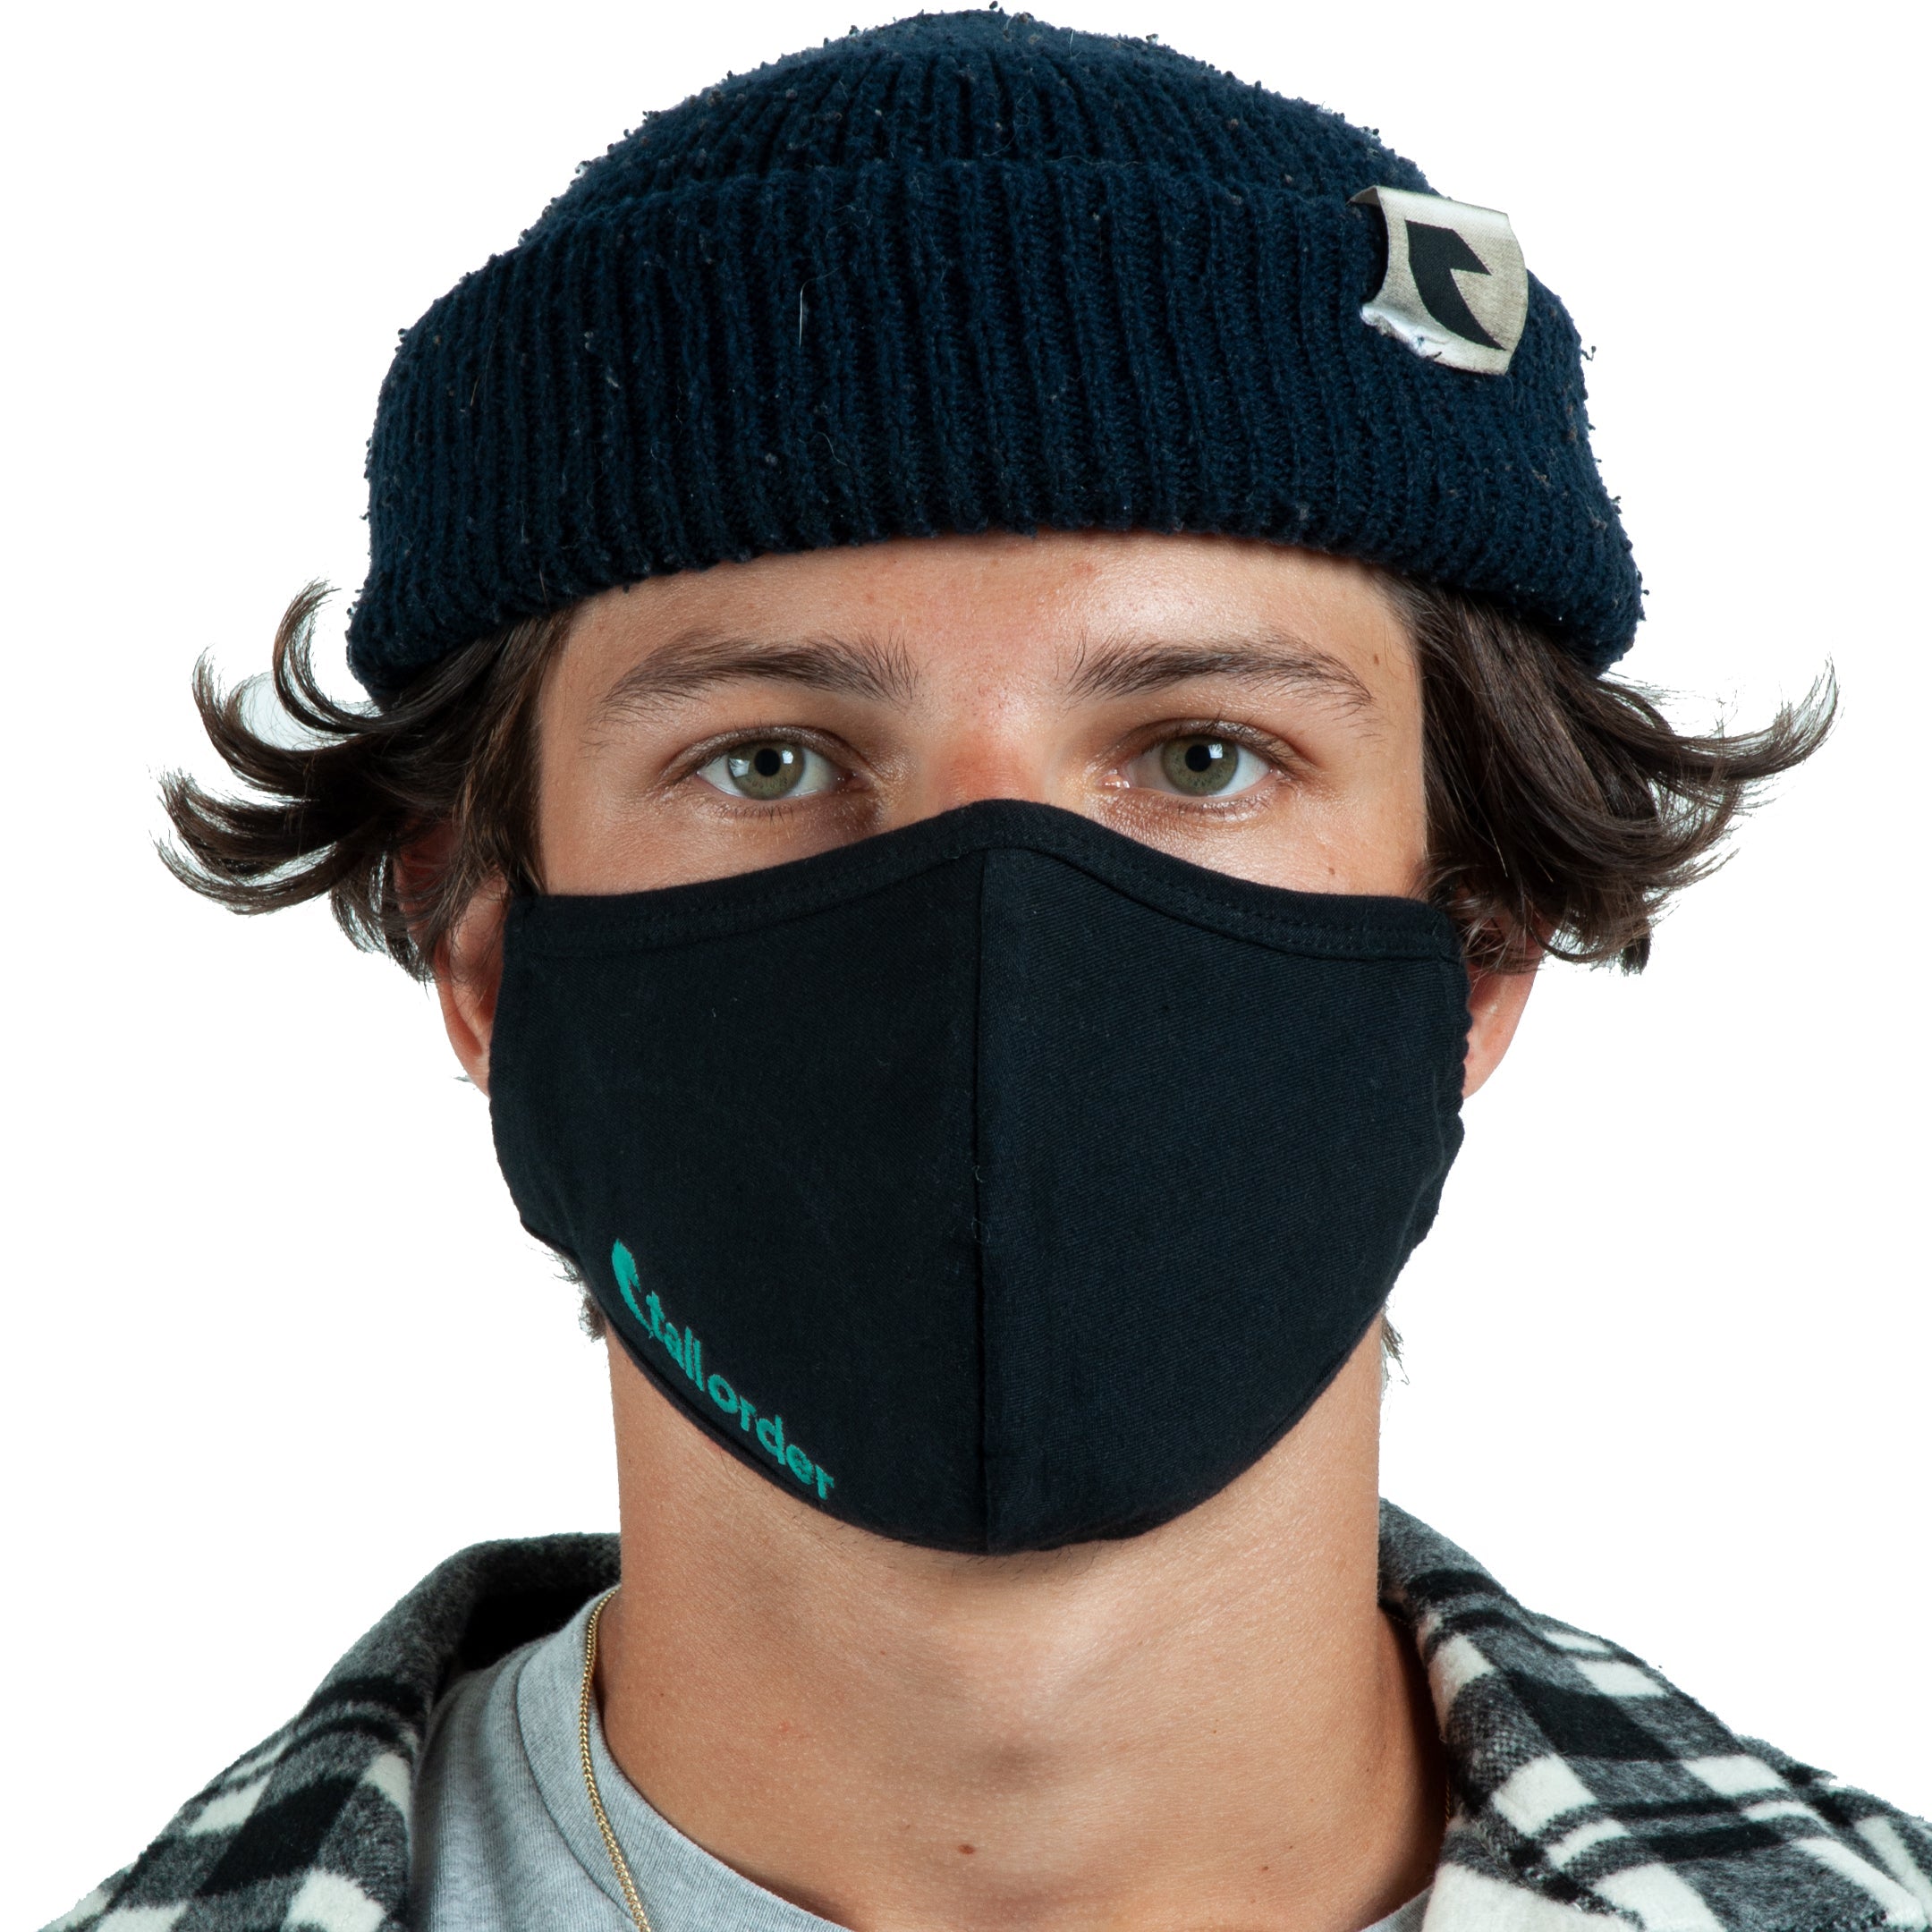 Tall Order Embroidered Mask - Black With Teal Embroidery | BMX